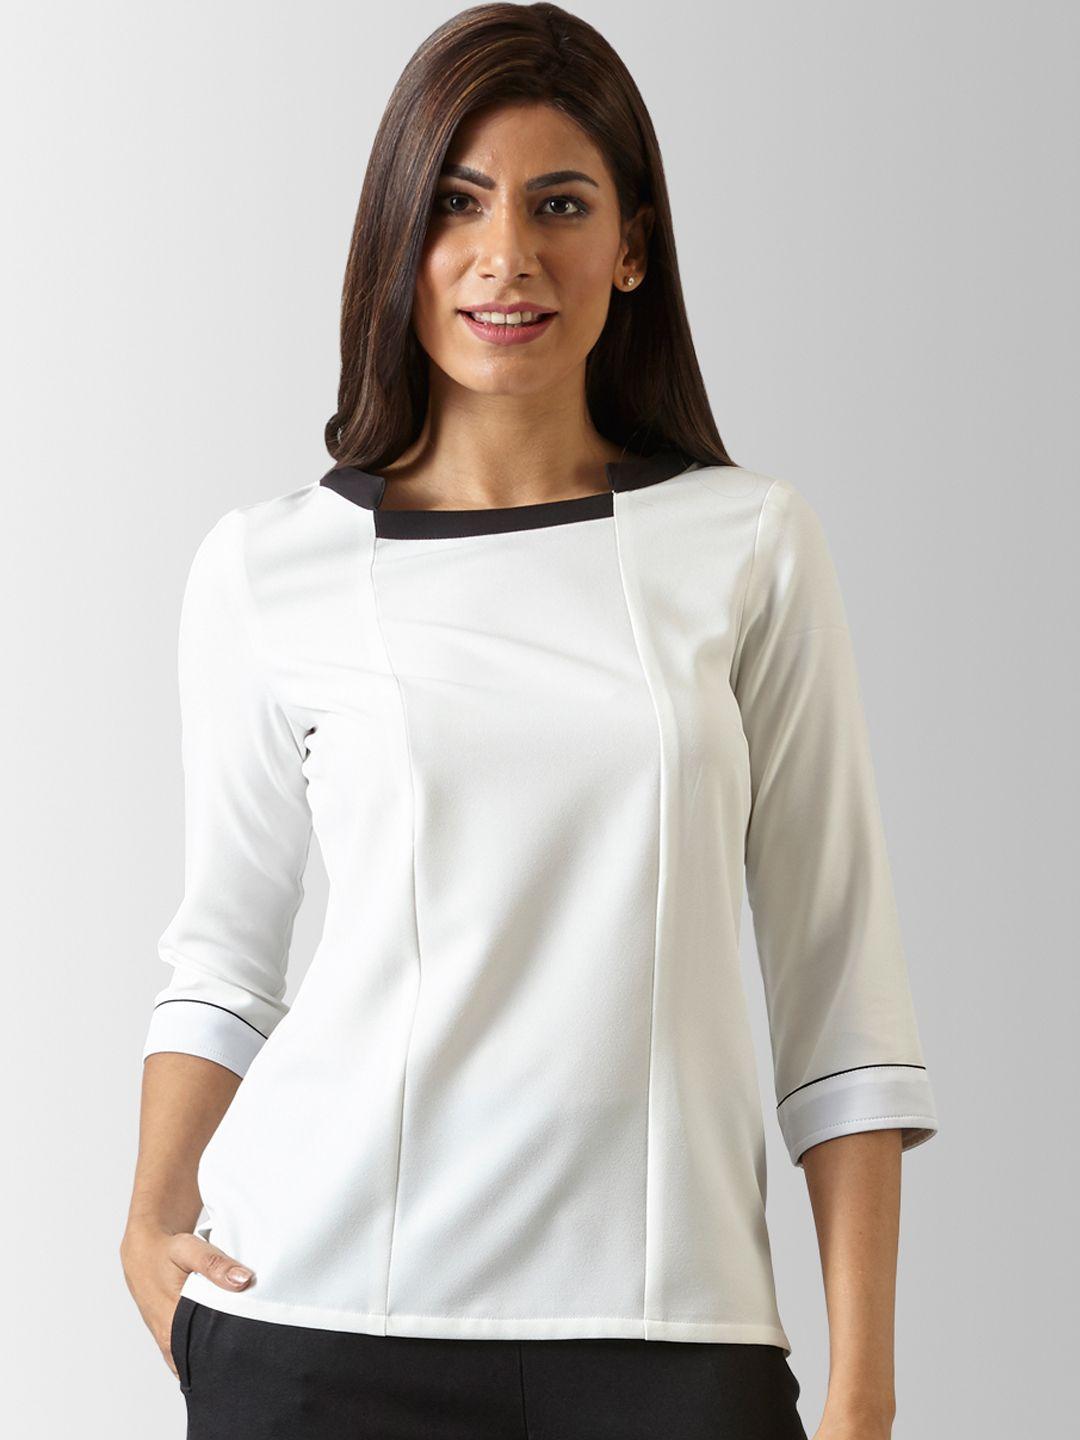 fablestreet women white solid top